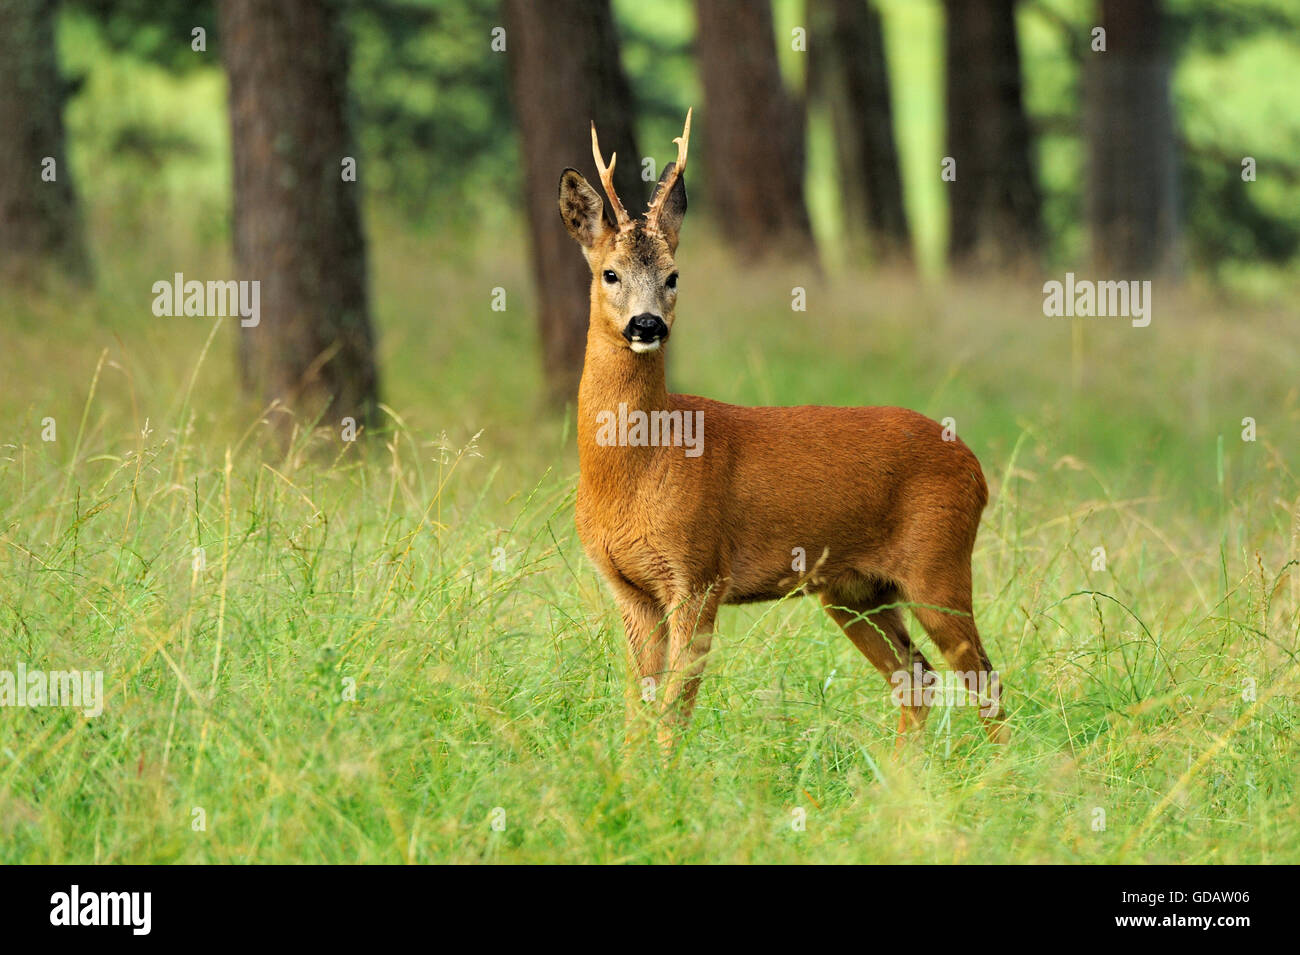 Roe deer in the wood,forest, Stock Photo